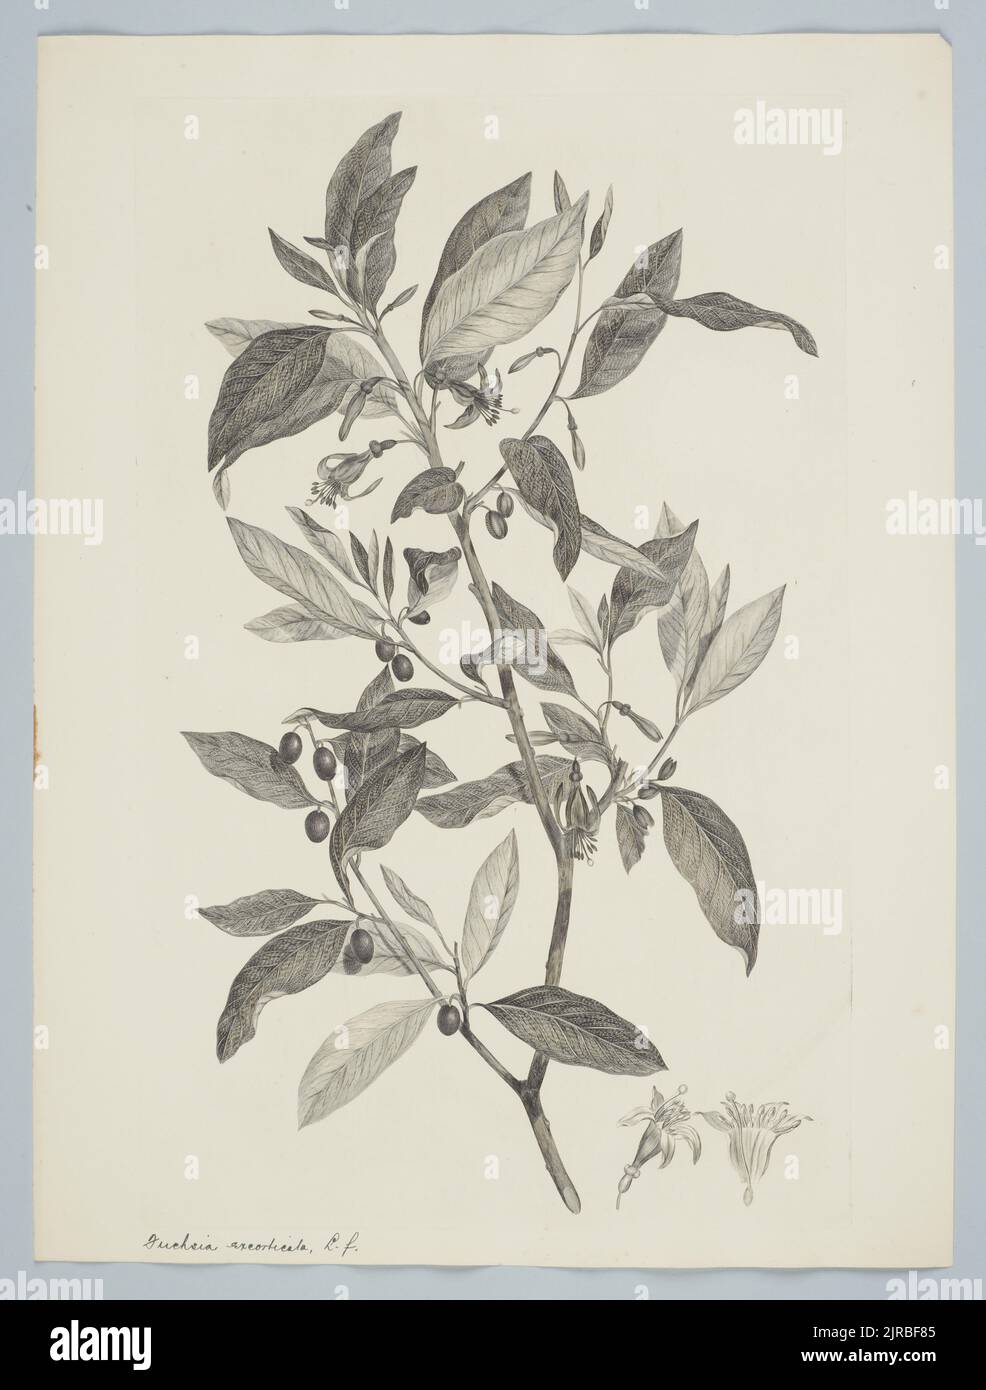 Fuchsia excorticata (Forster & G. Forster) Linnaeus f., 1895, United Kingdom, by Sydney Parkinson. Gift of the British Museum, 1895. Stock Photo